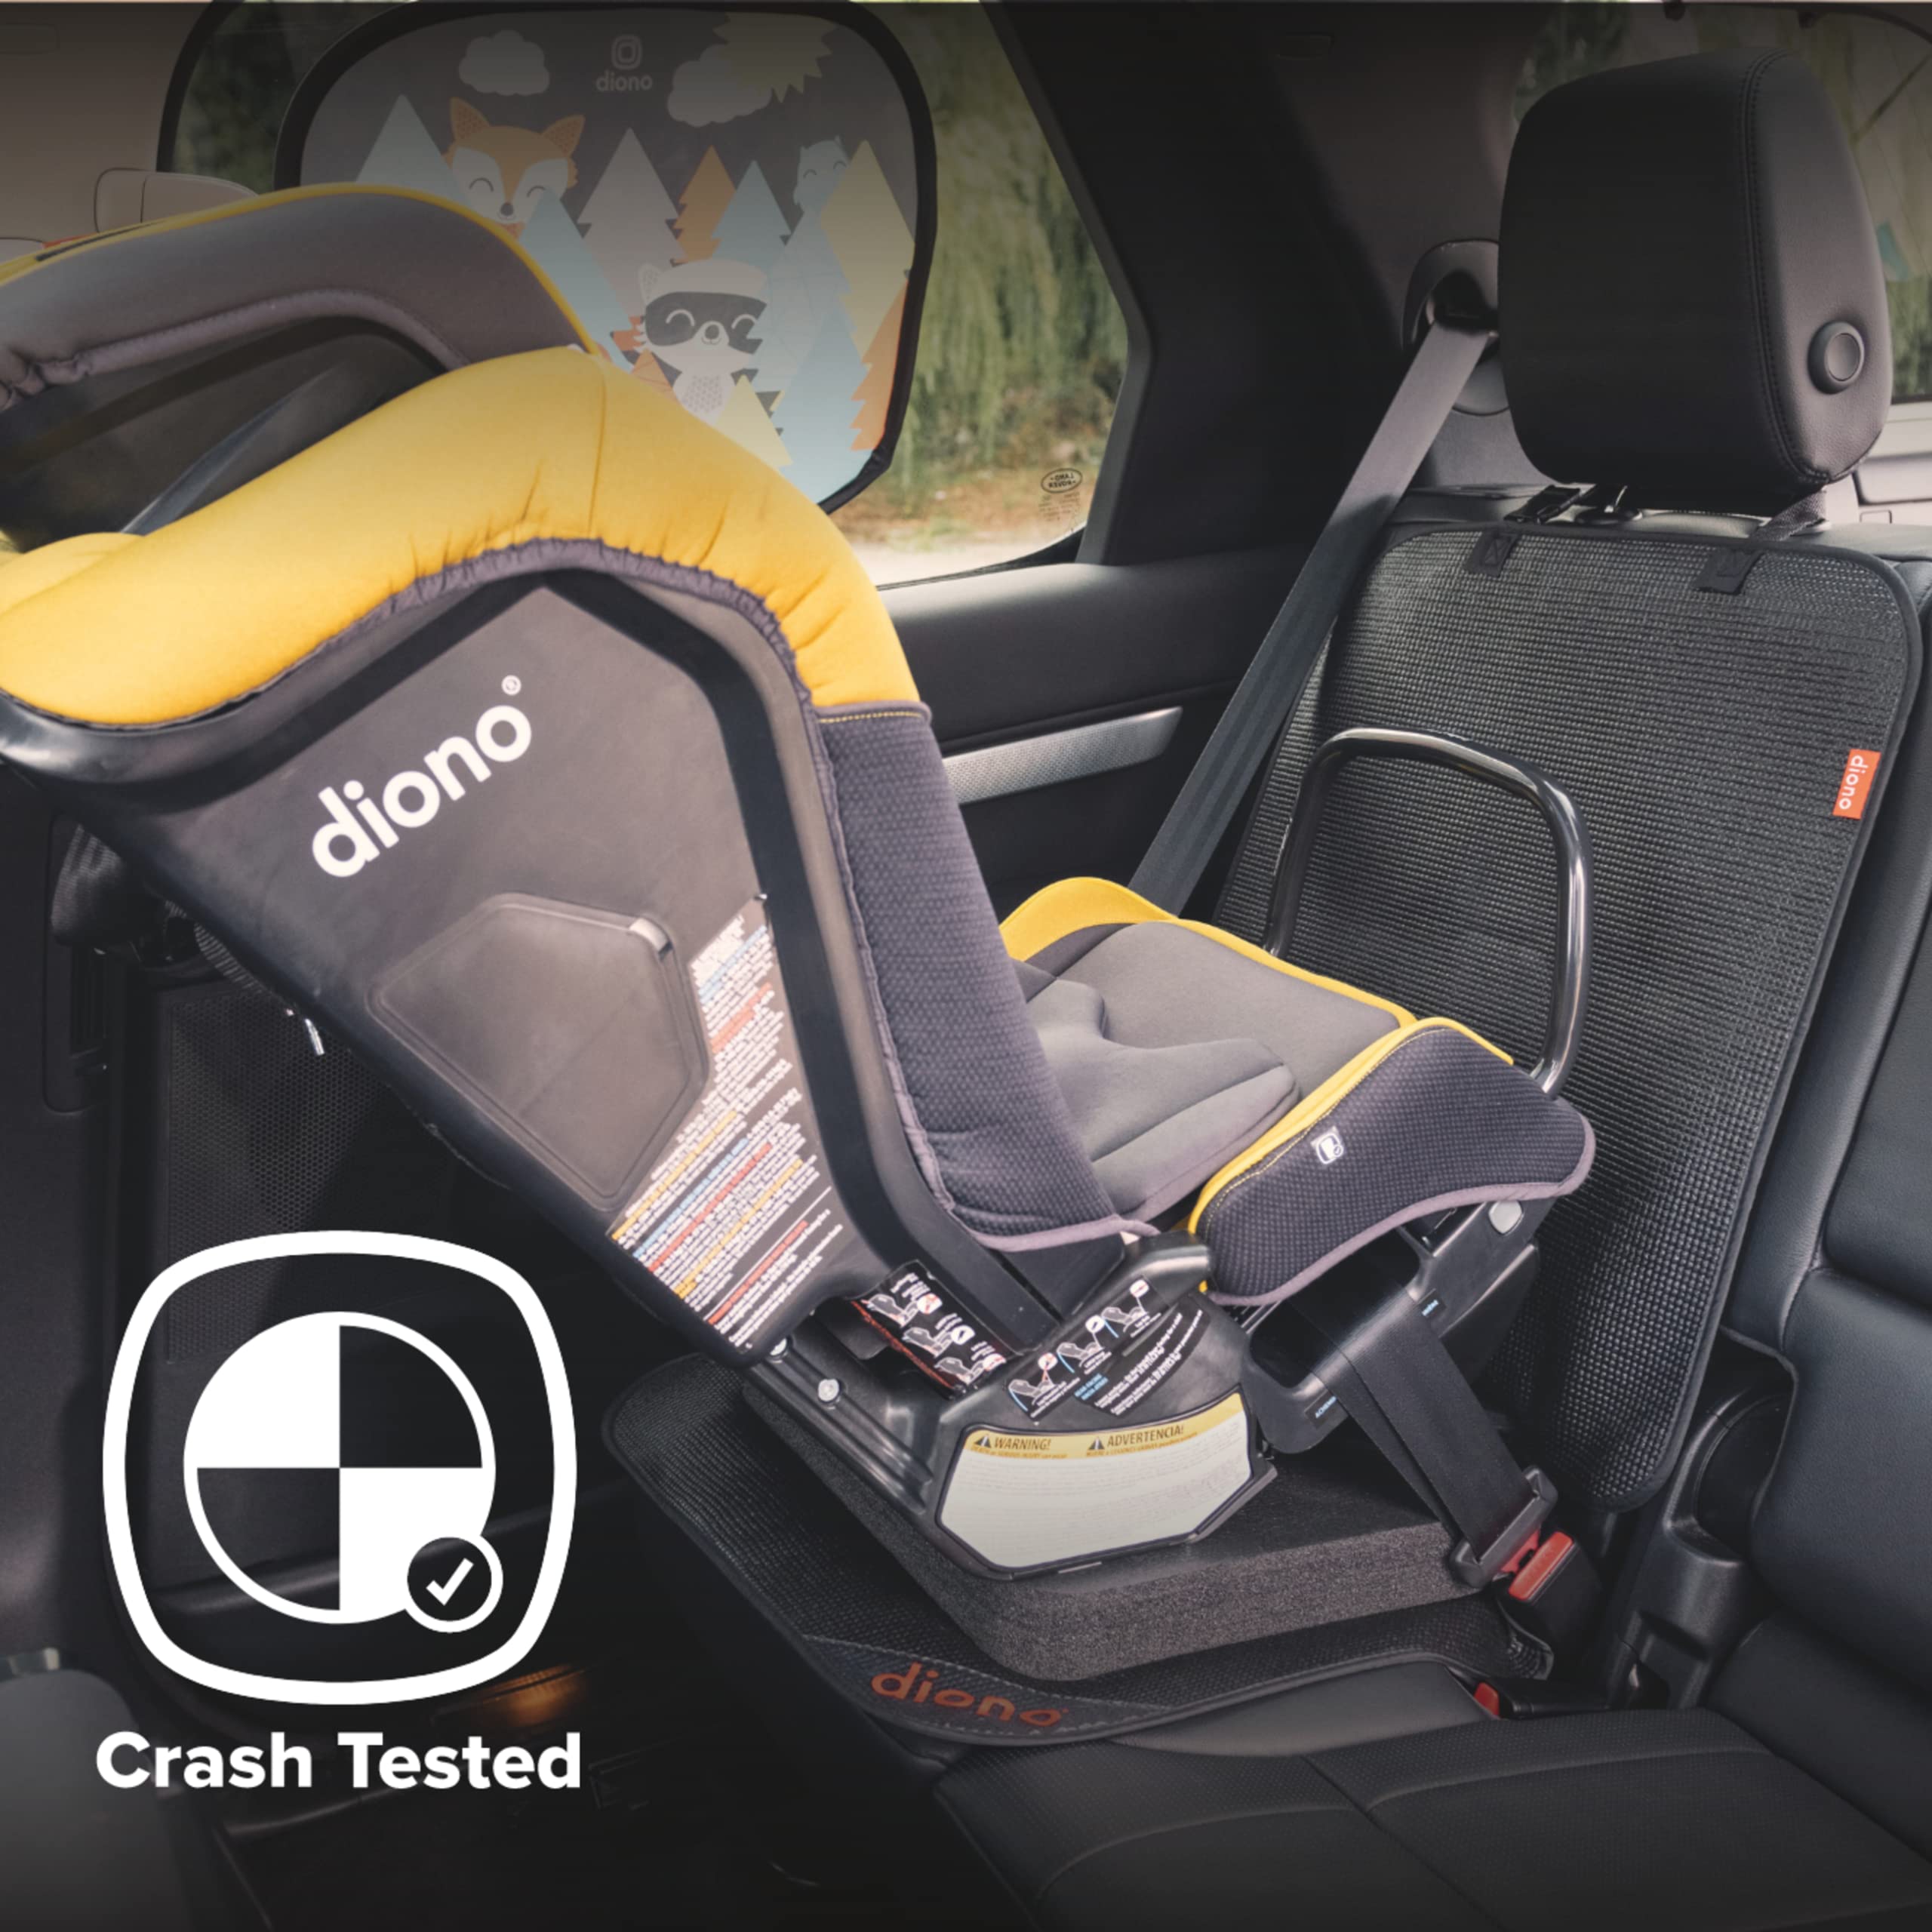 Diono Grip It Car Seat Protector For Baby Child Car Seat, Crash Tested With Full Seat Cover, Anti Slip Backing, Durable, Water Resistant Protection for Vehicle Upholstery